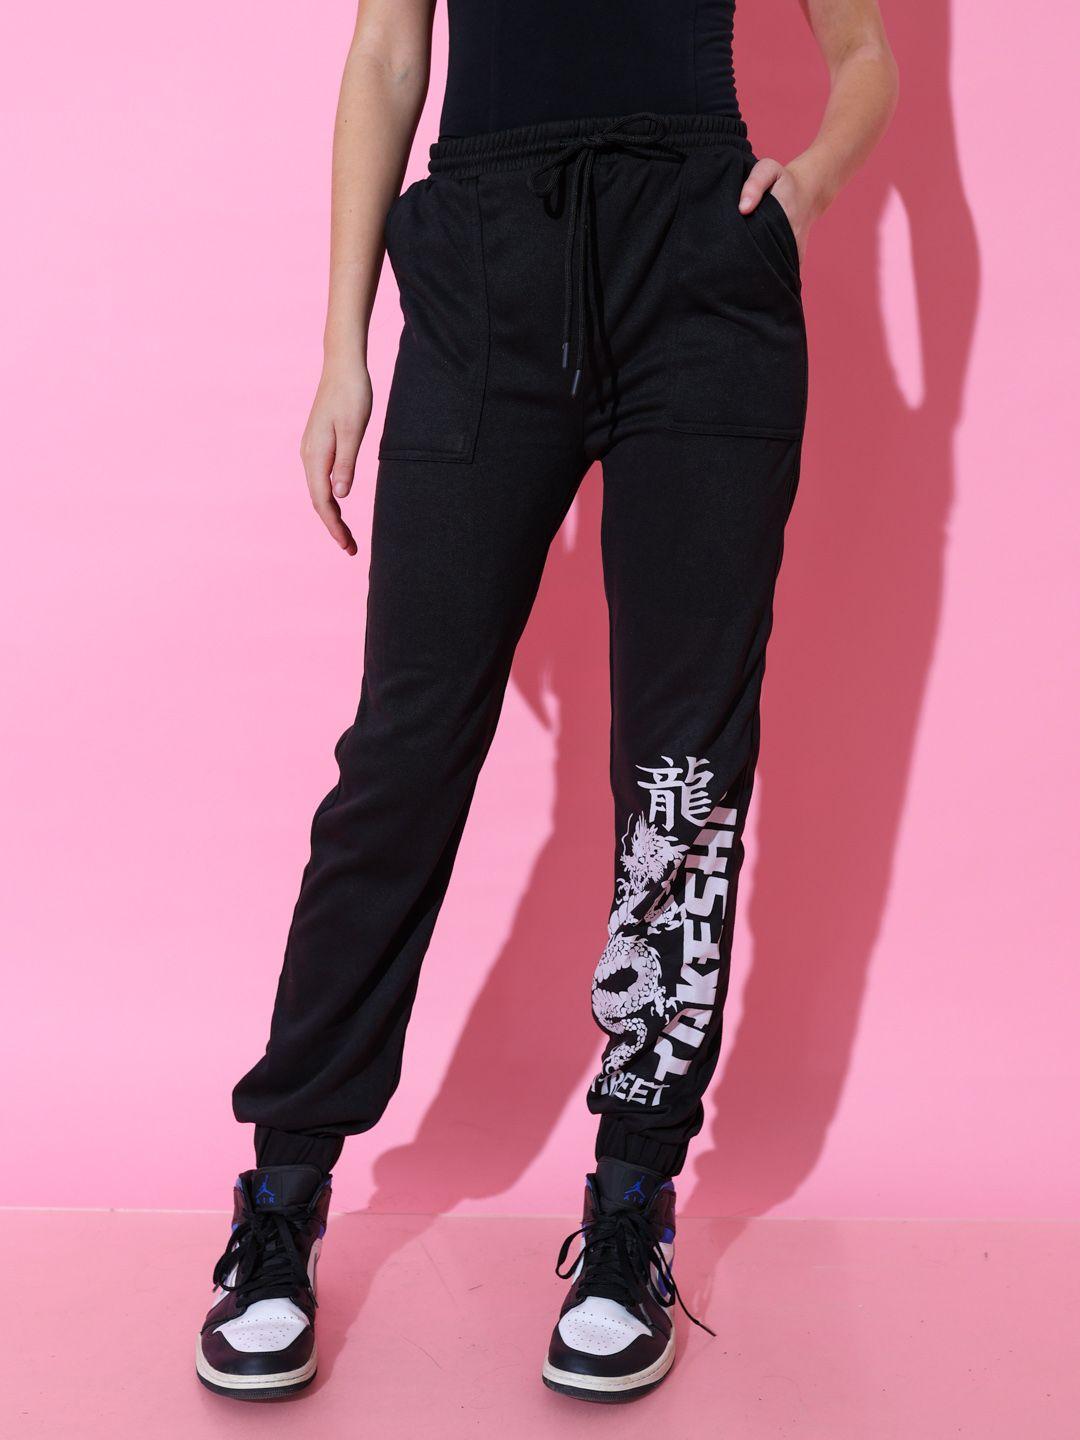 stylecast x hersheinbox women pure cotton mid-rise printed jogger